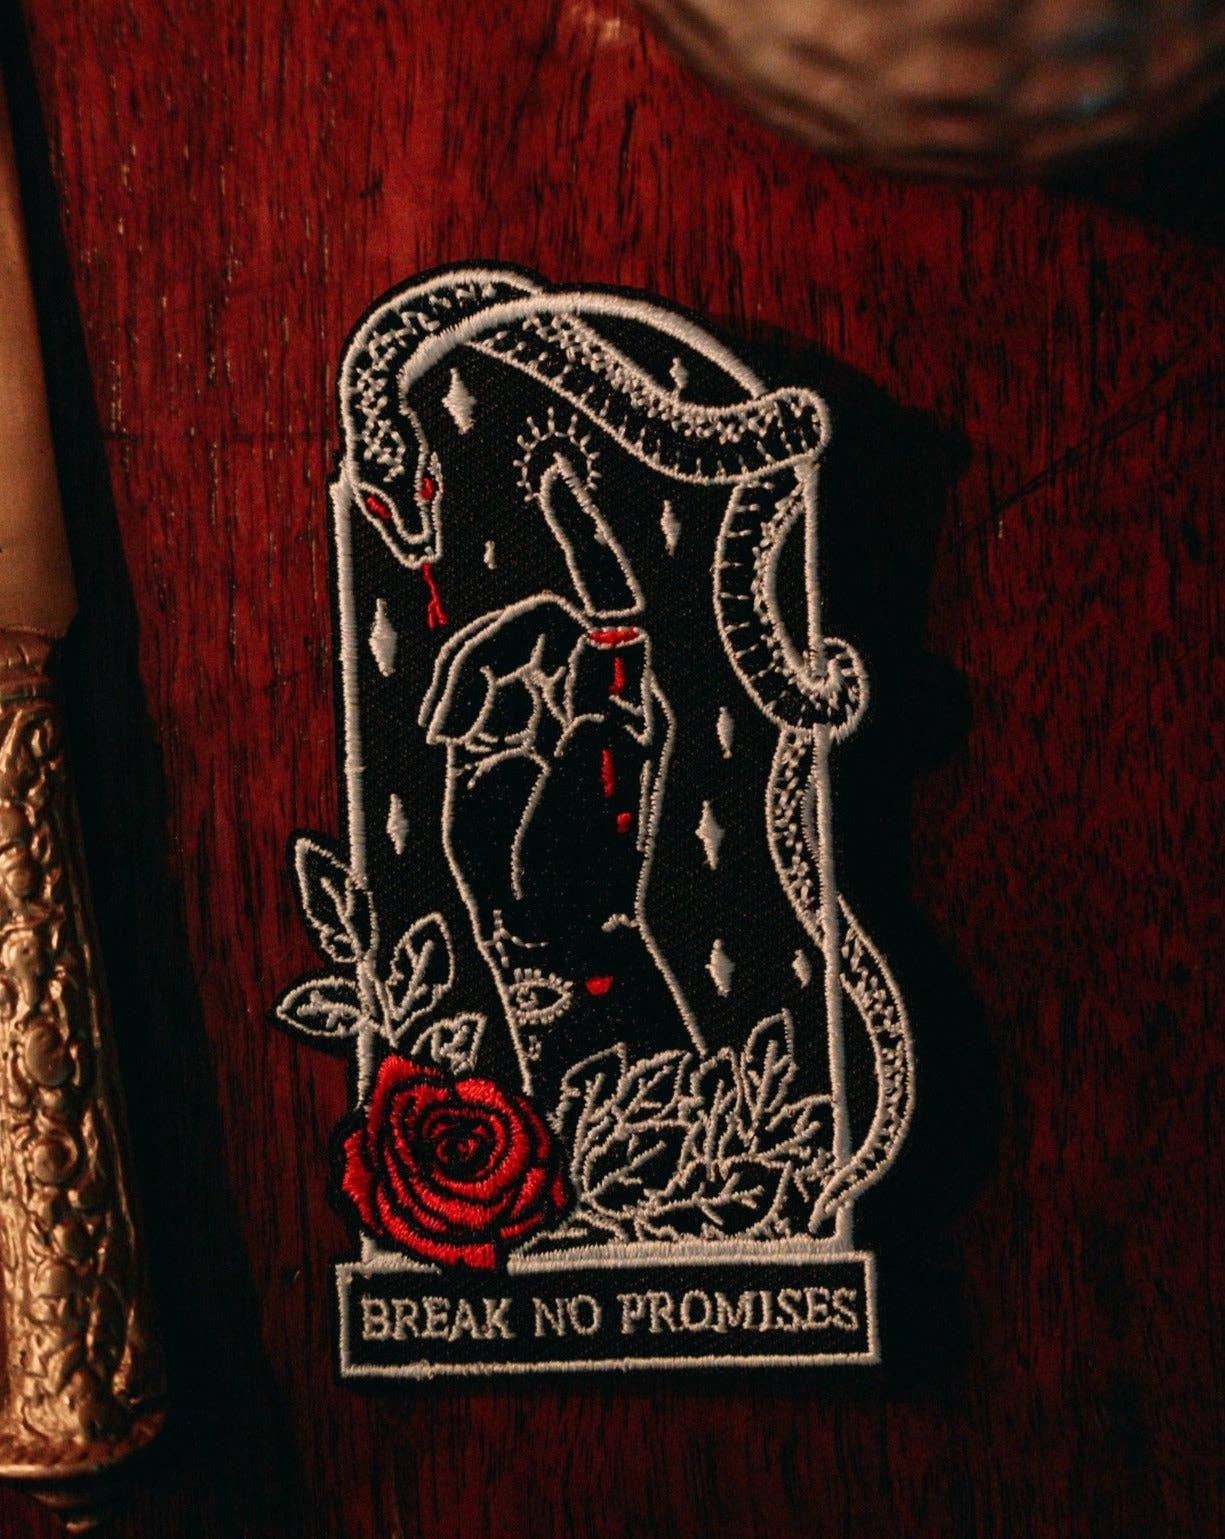 Embroidered Patch - "Break No Promises"